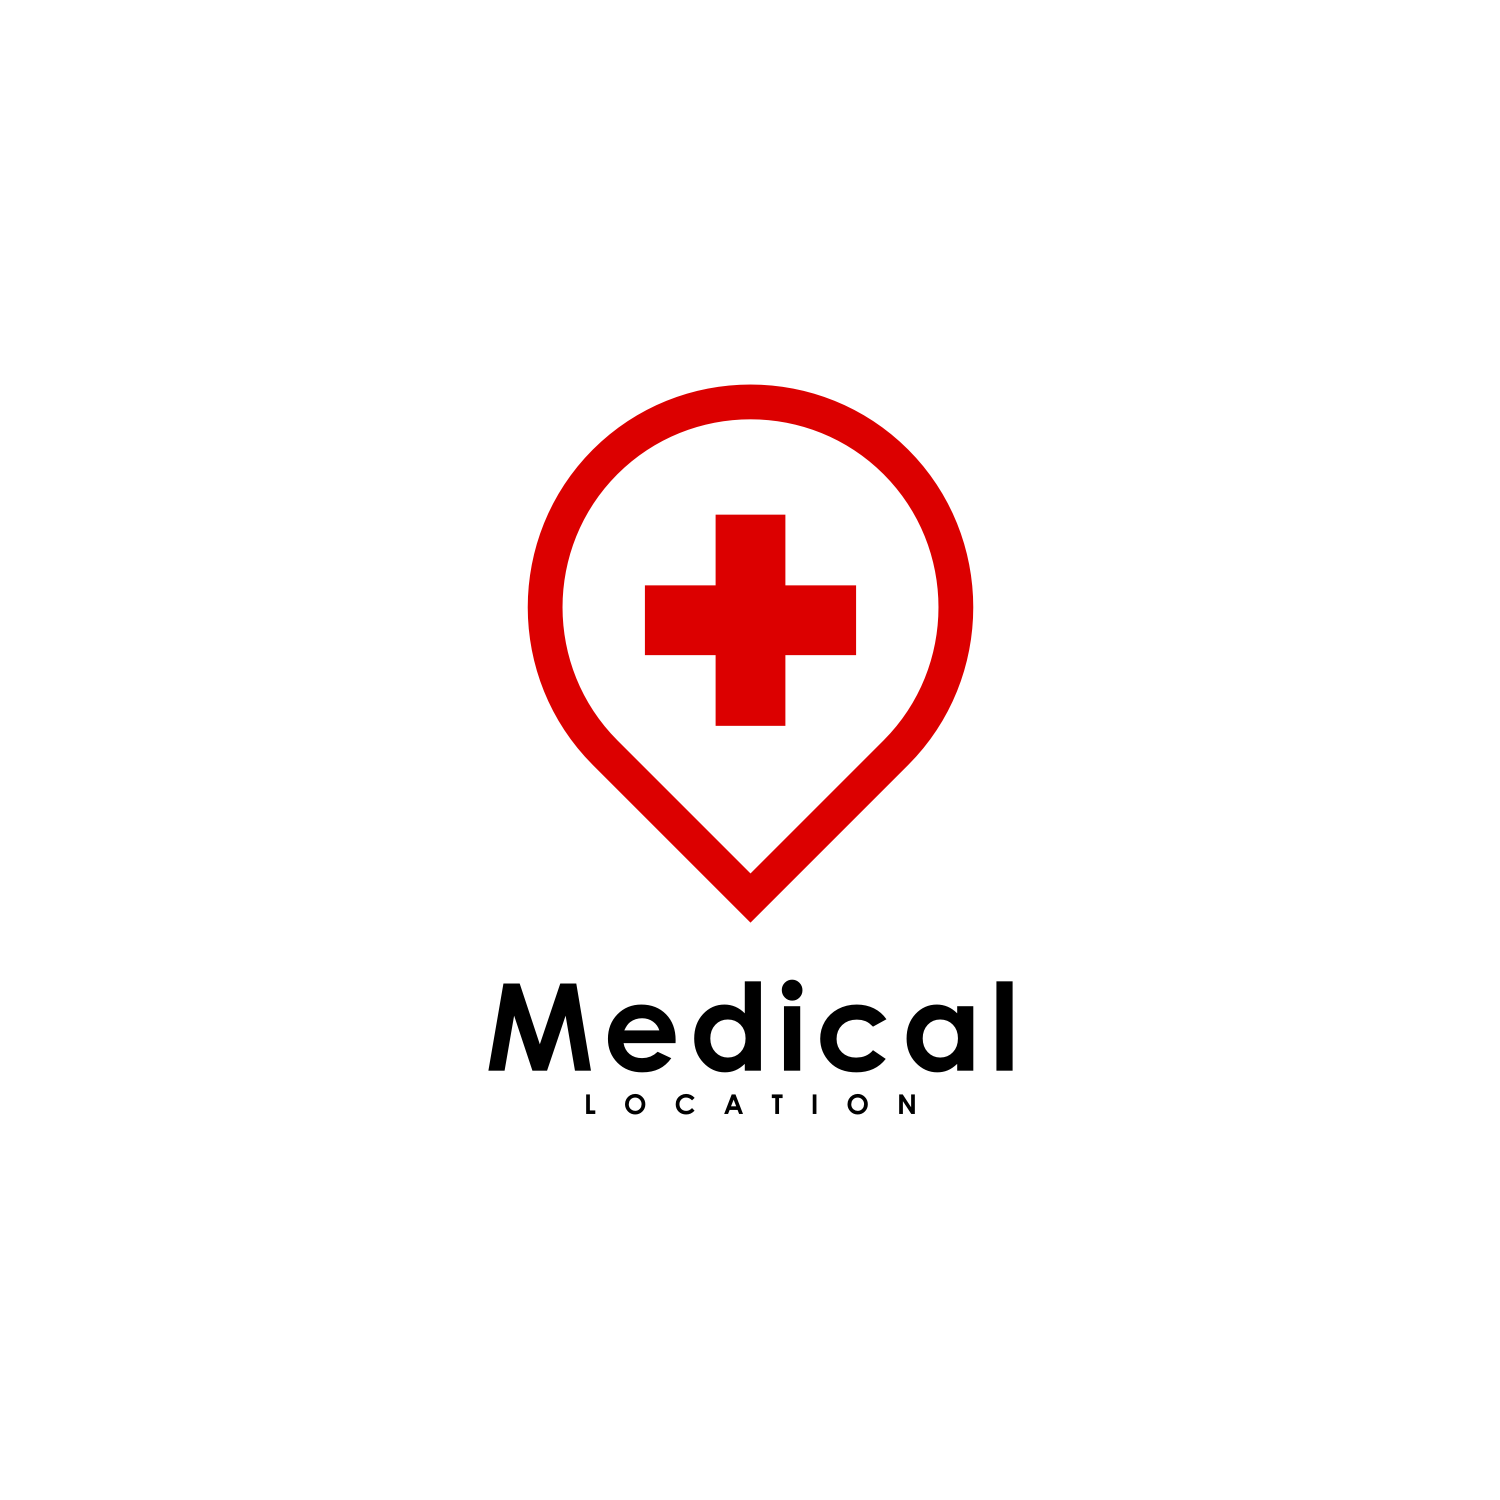 Medical Health Care Red Cross with Caduceus Symbol Art Print by hobrath |  Society6